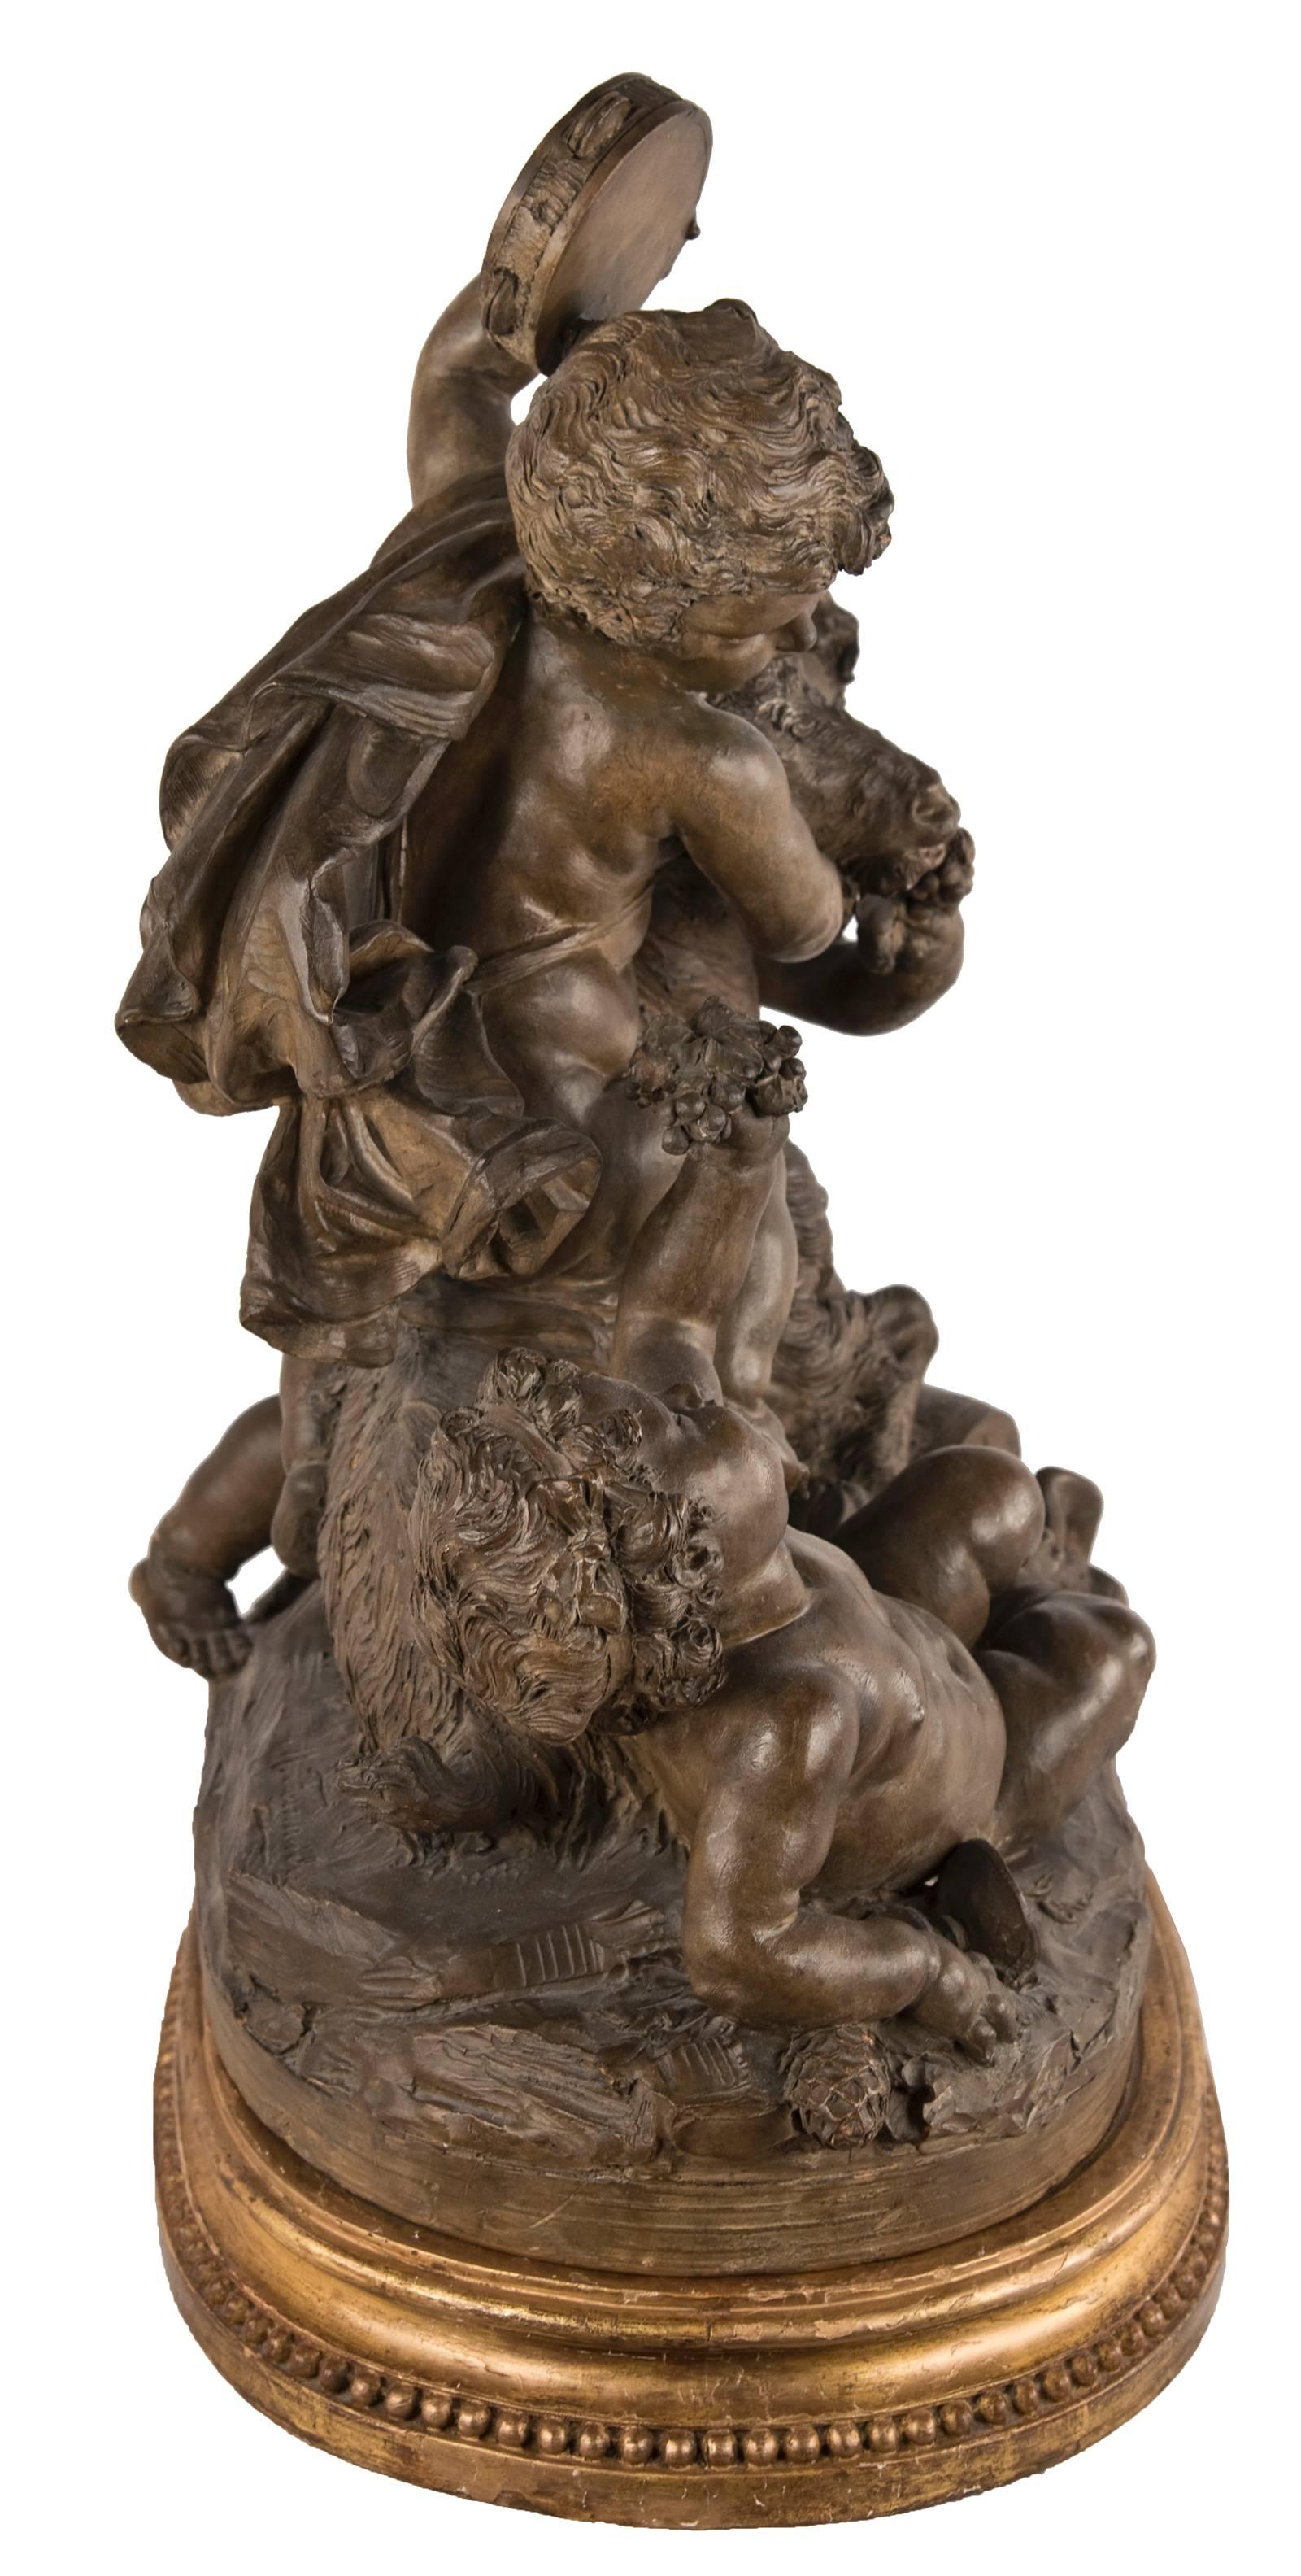 French 19th Century Patinated Terra-cotta Group of Bacchic Putti